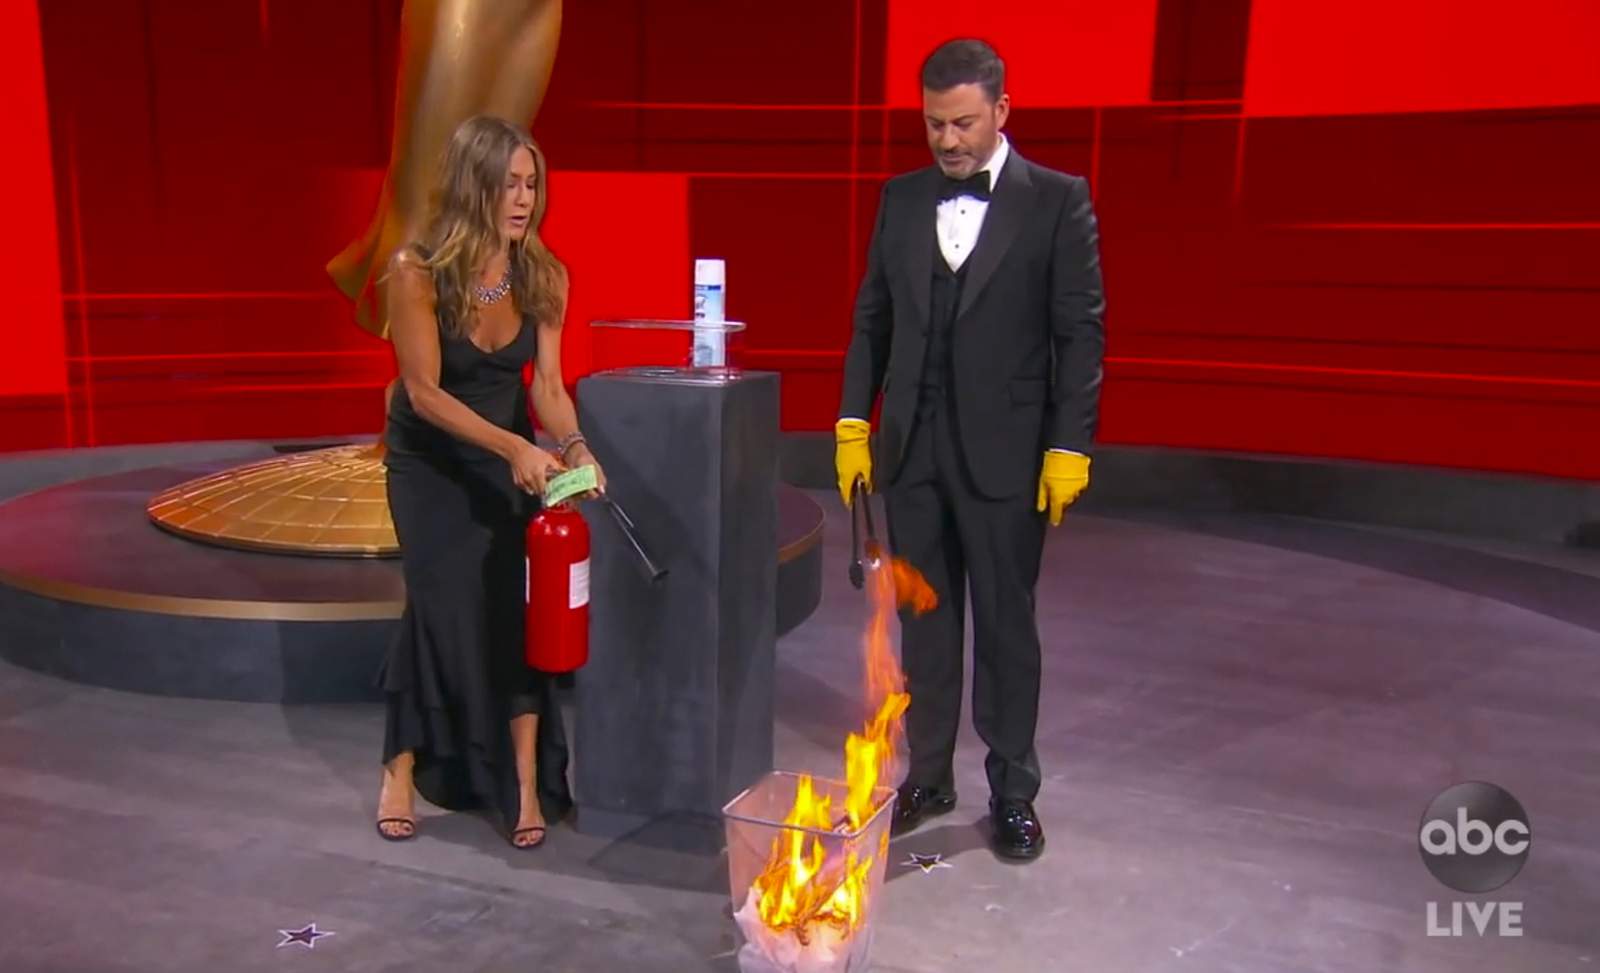 Aniston is award-worthy first responder in Emmy fire skit